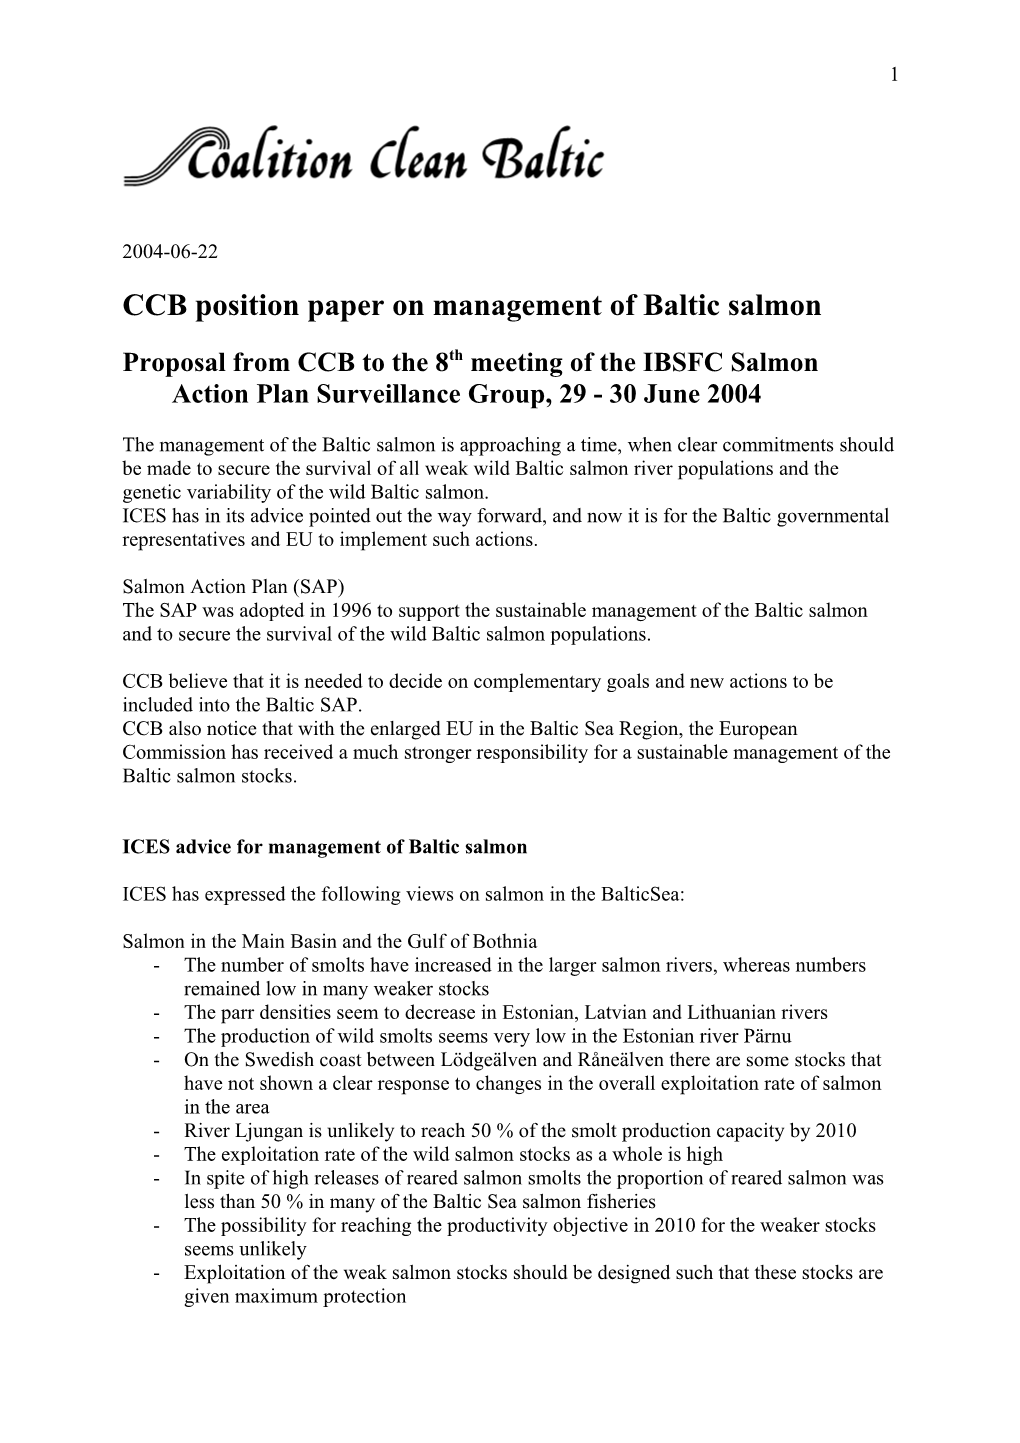 CCB Position Paper on Management of Baltic Salmon